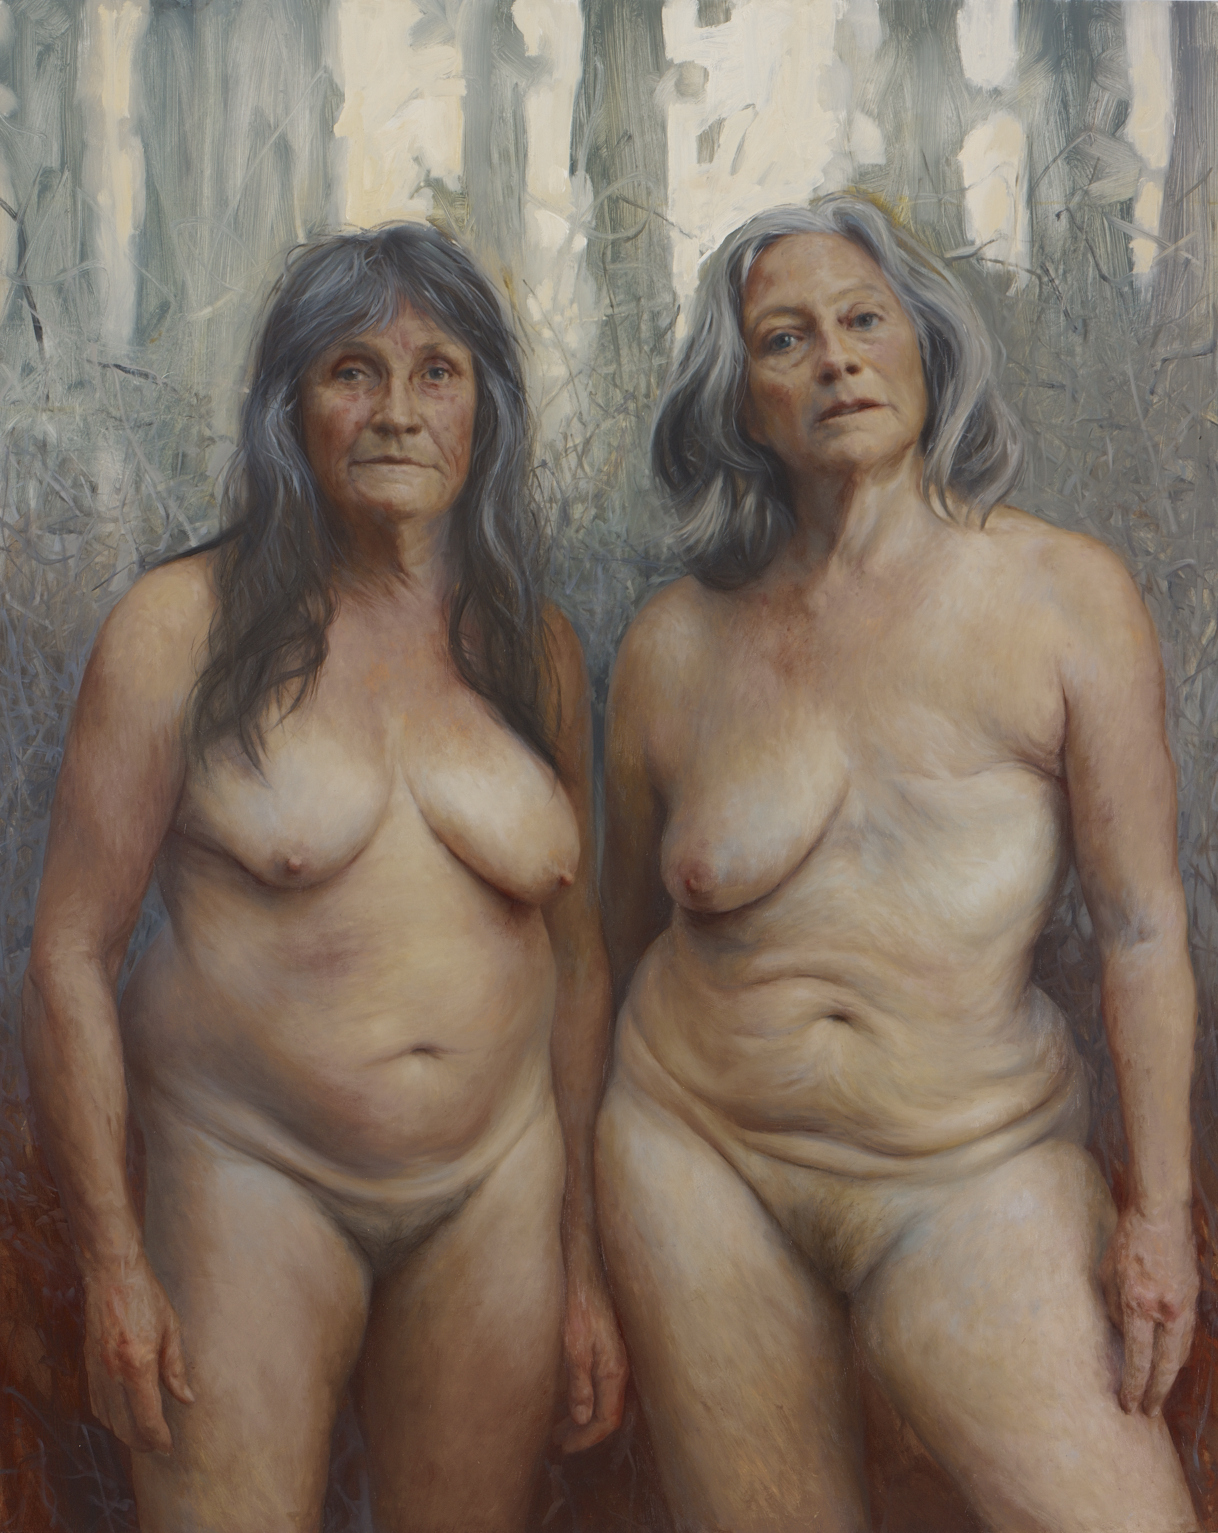 Aleah Chapin's Nudes Show The Beauty Of The Aging Human Form ...